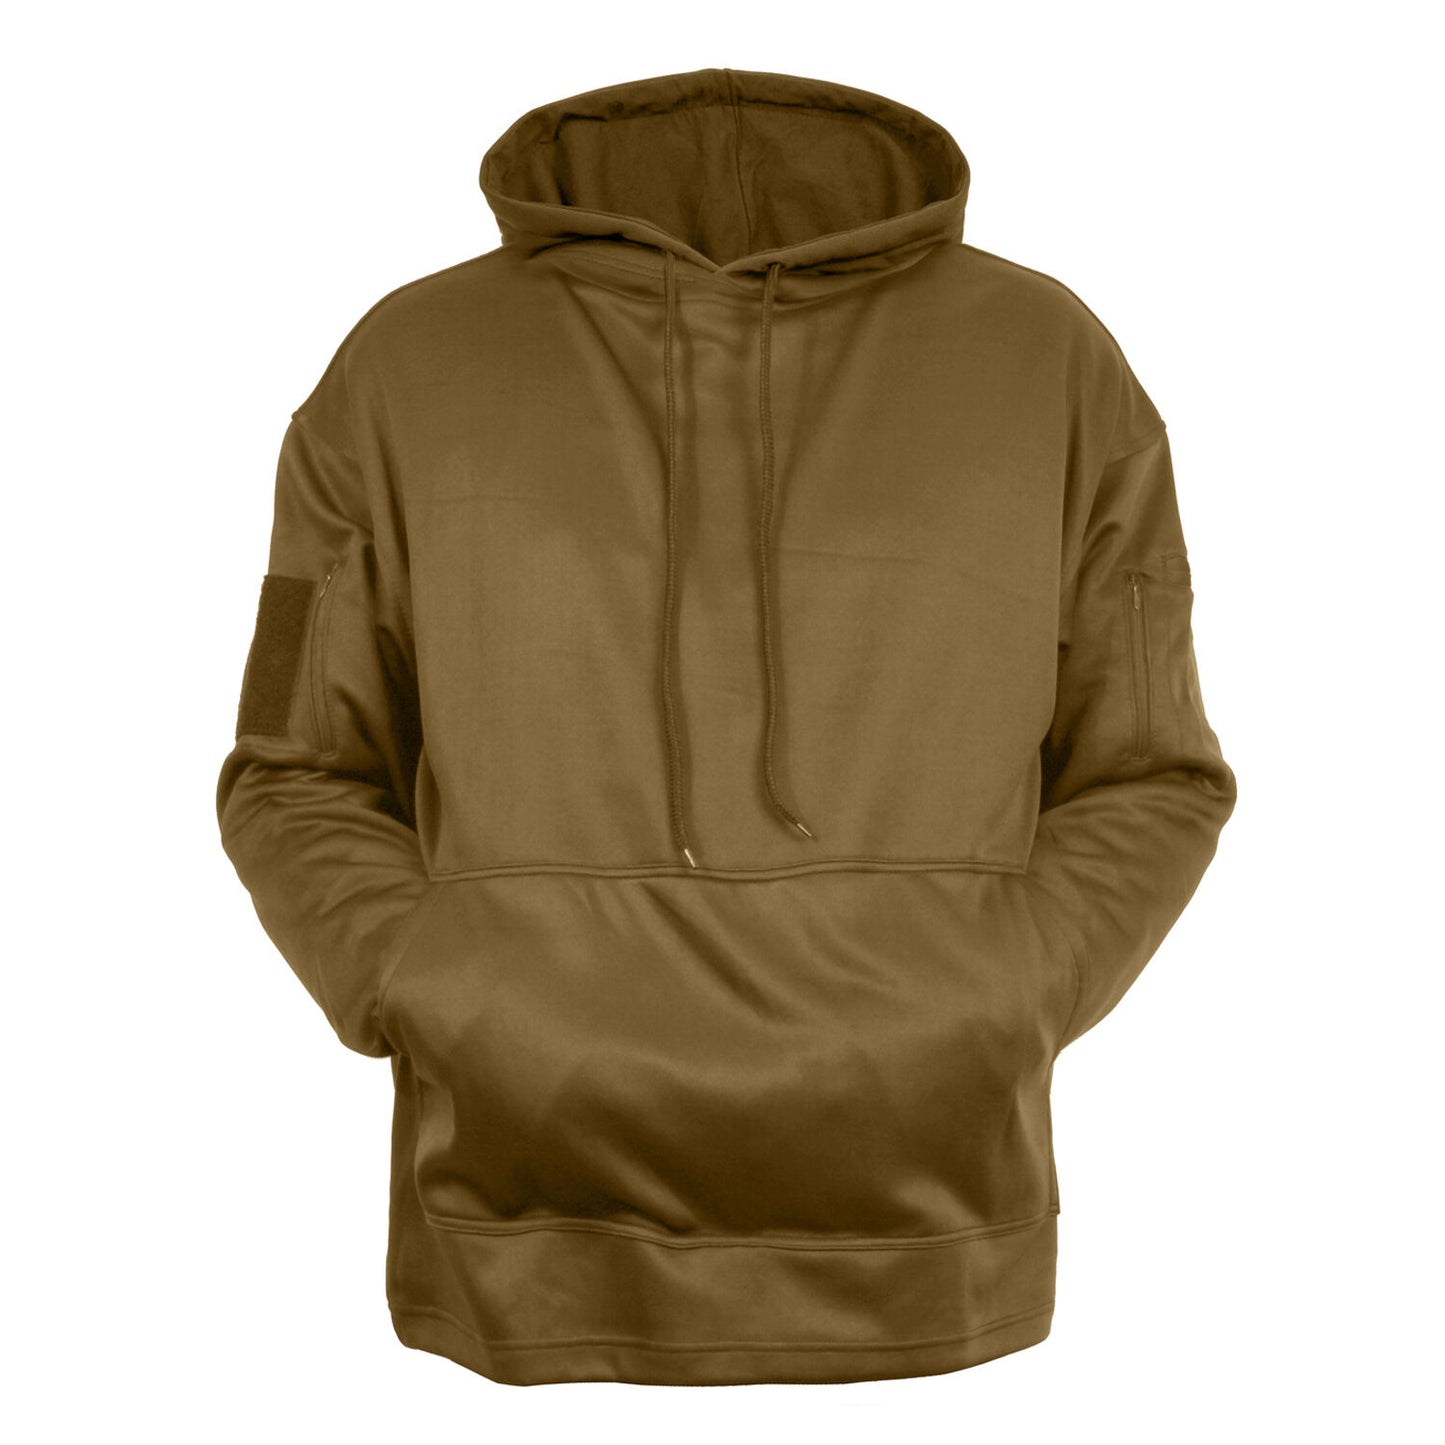 Rothco Concealed Carry Hoodie - Coyote Brown